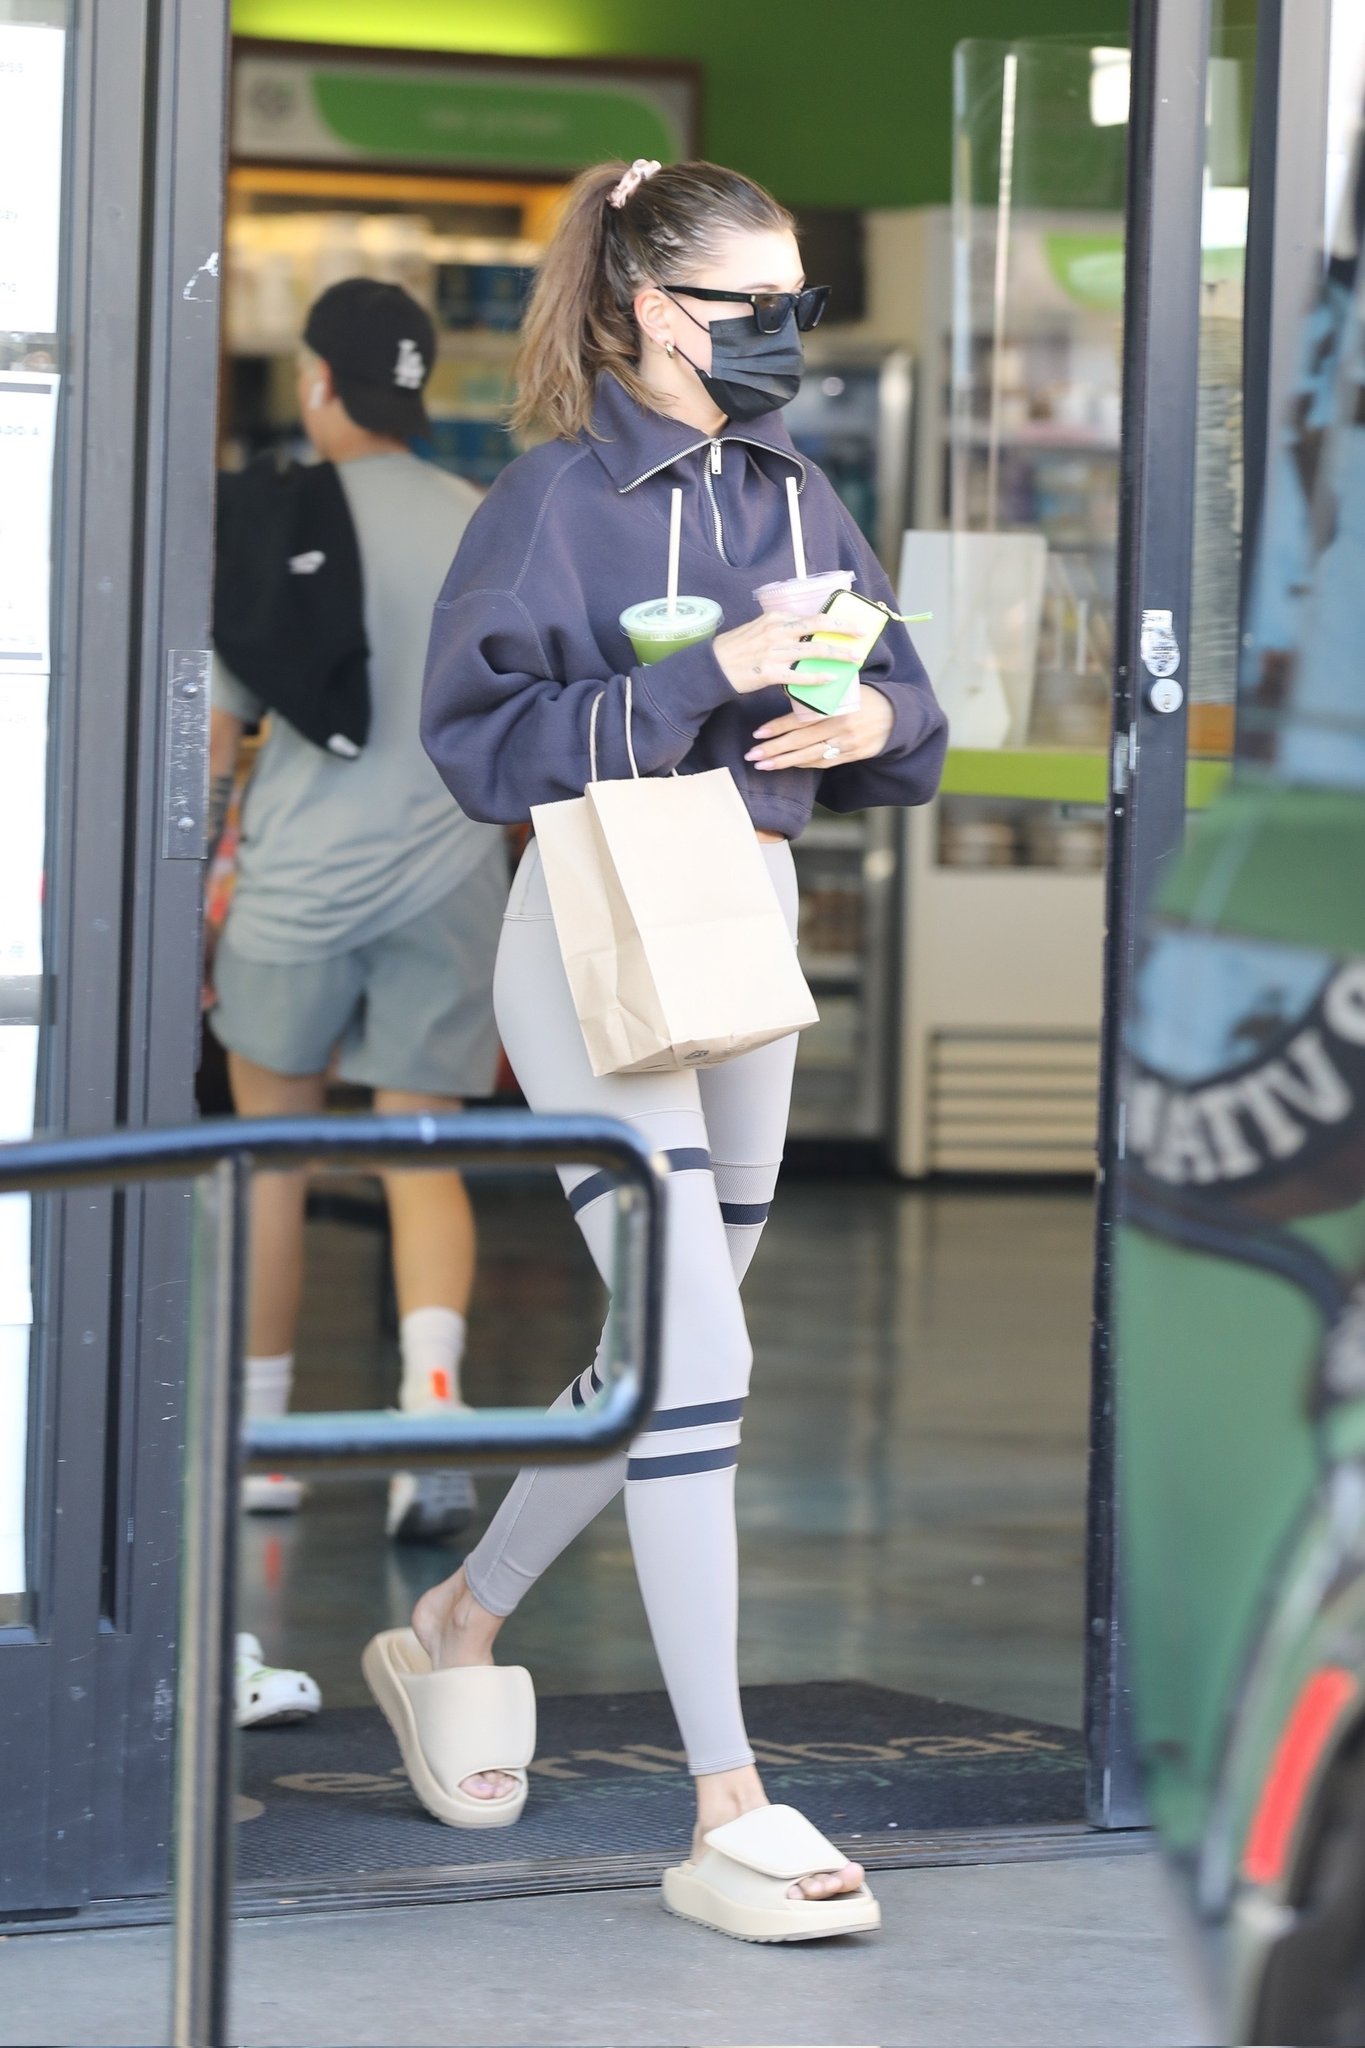 hailey-bieber-wears-isabel-marant-sweater-out-in-west-hollywood-february-3-2022